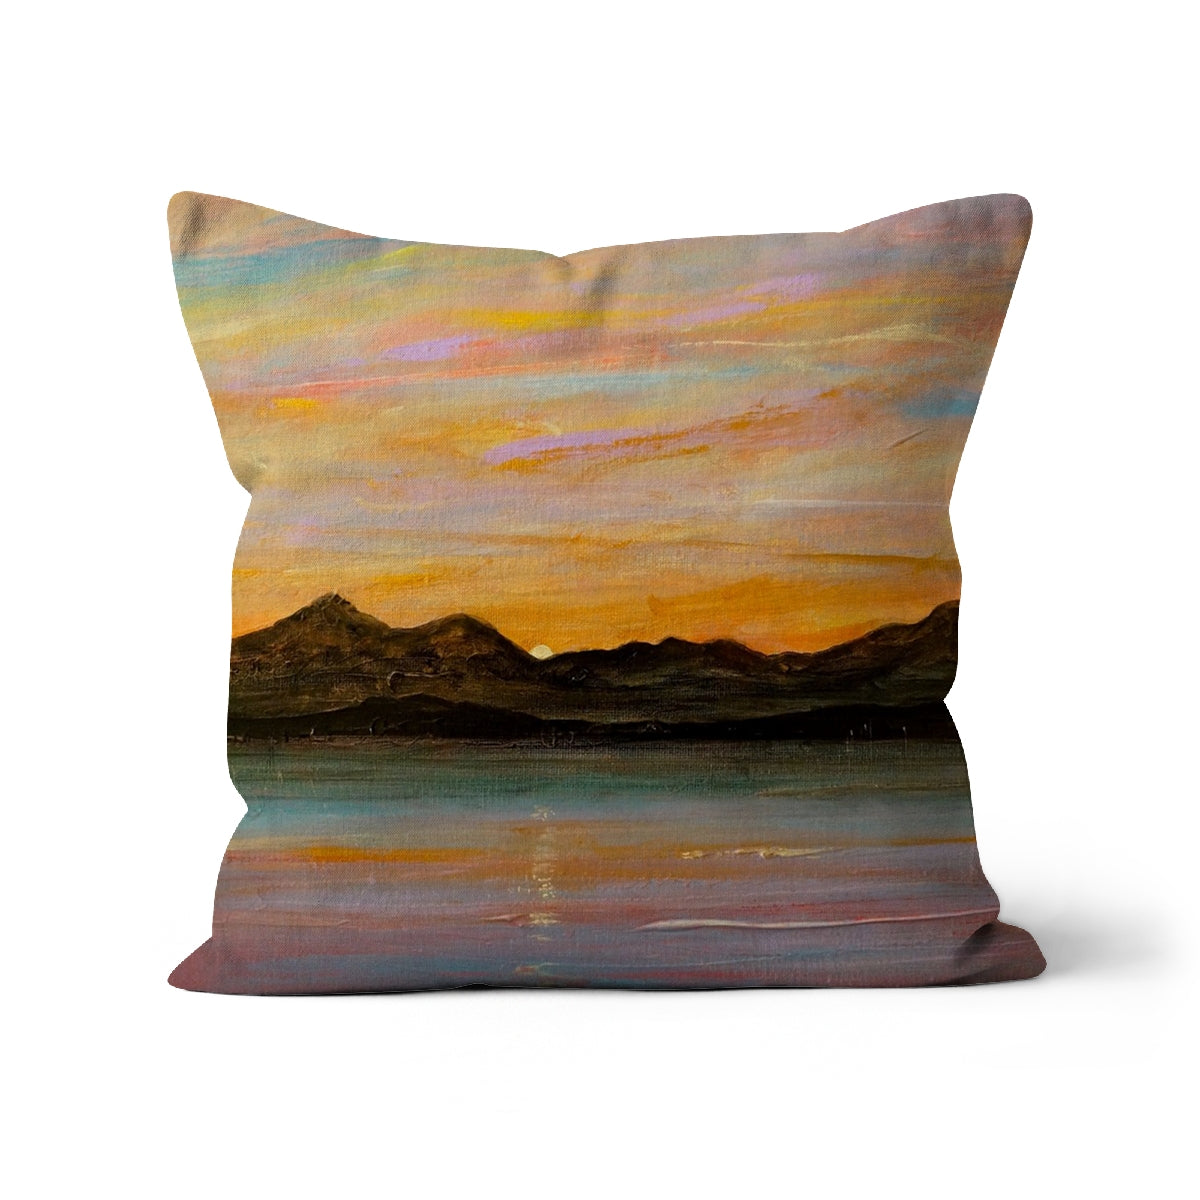 The Sleeping Warrior Arran Art Gifts Cushion-Cushions-Arran Art Gallery-Canvas-18"x18"-Paintings, Prints, Homeware, Art Gifts From Scotland By Scottish Artist Kevin Hunter